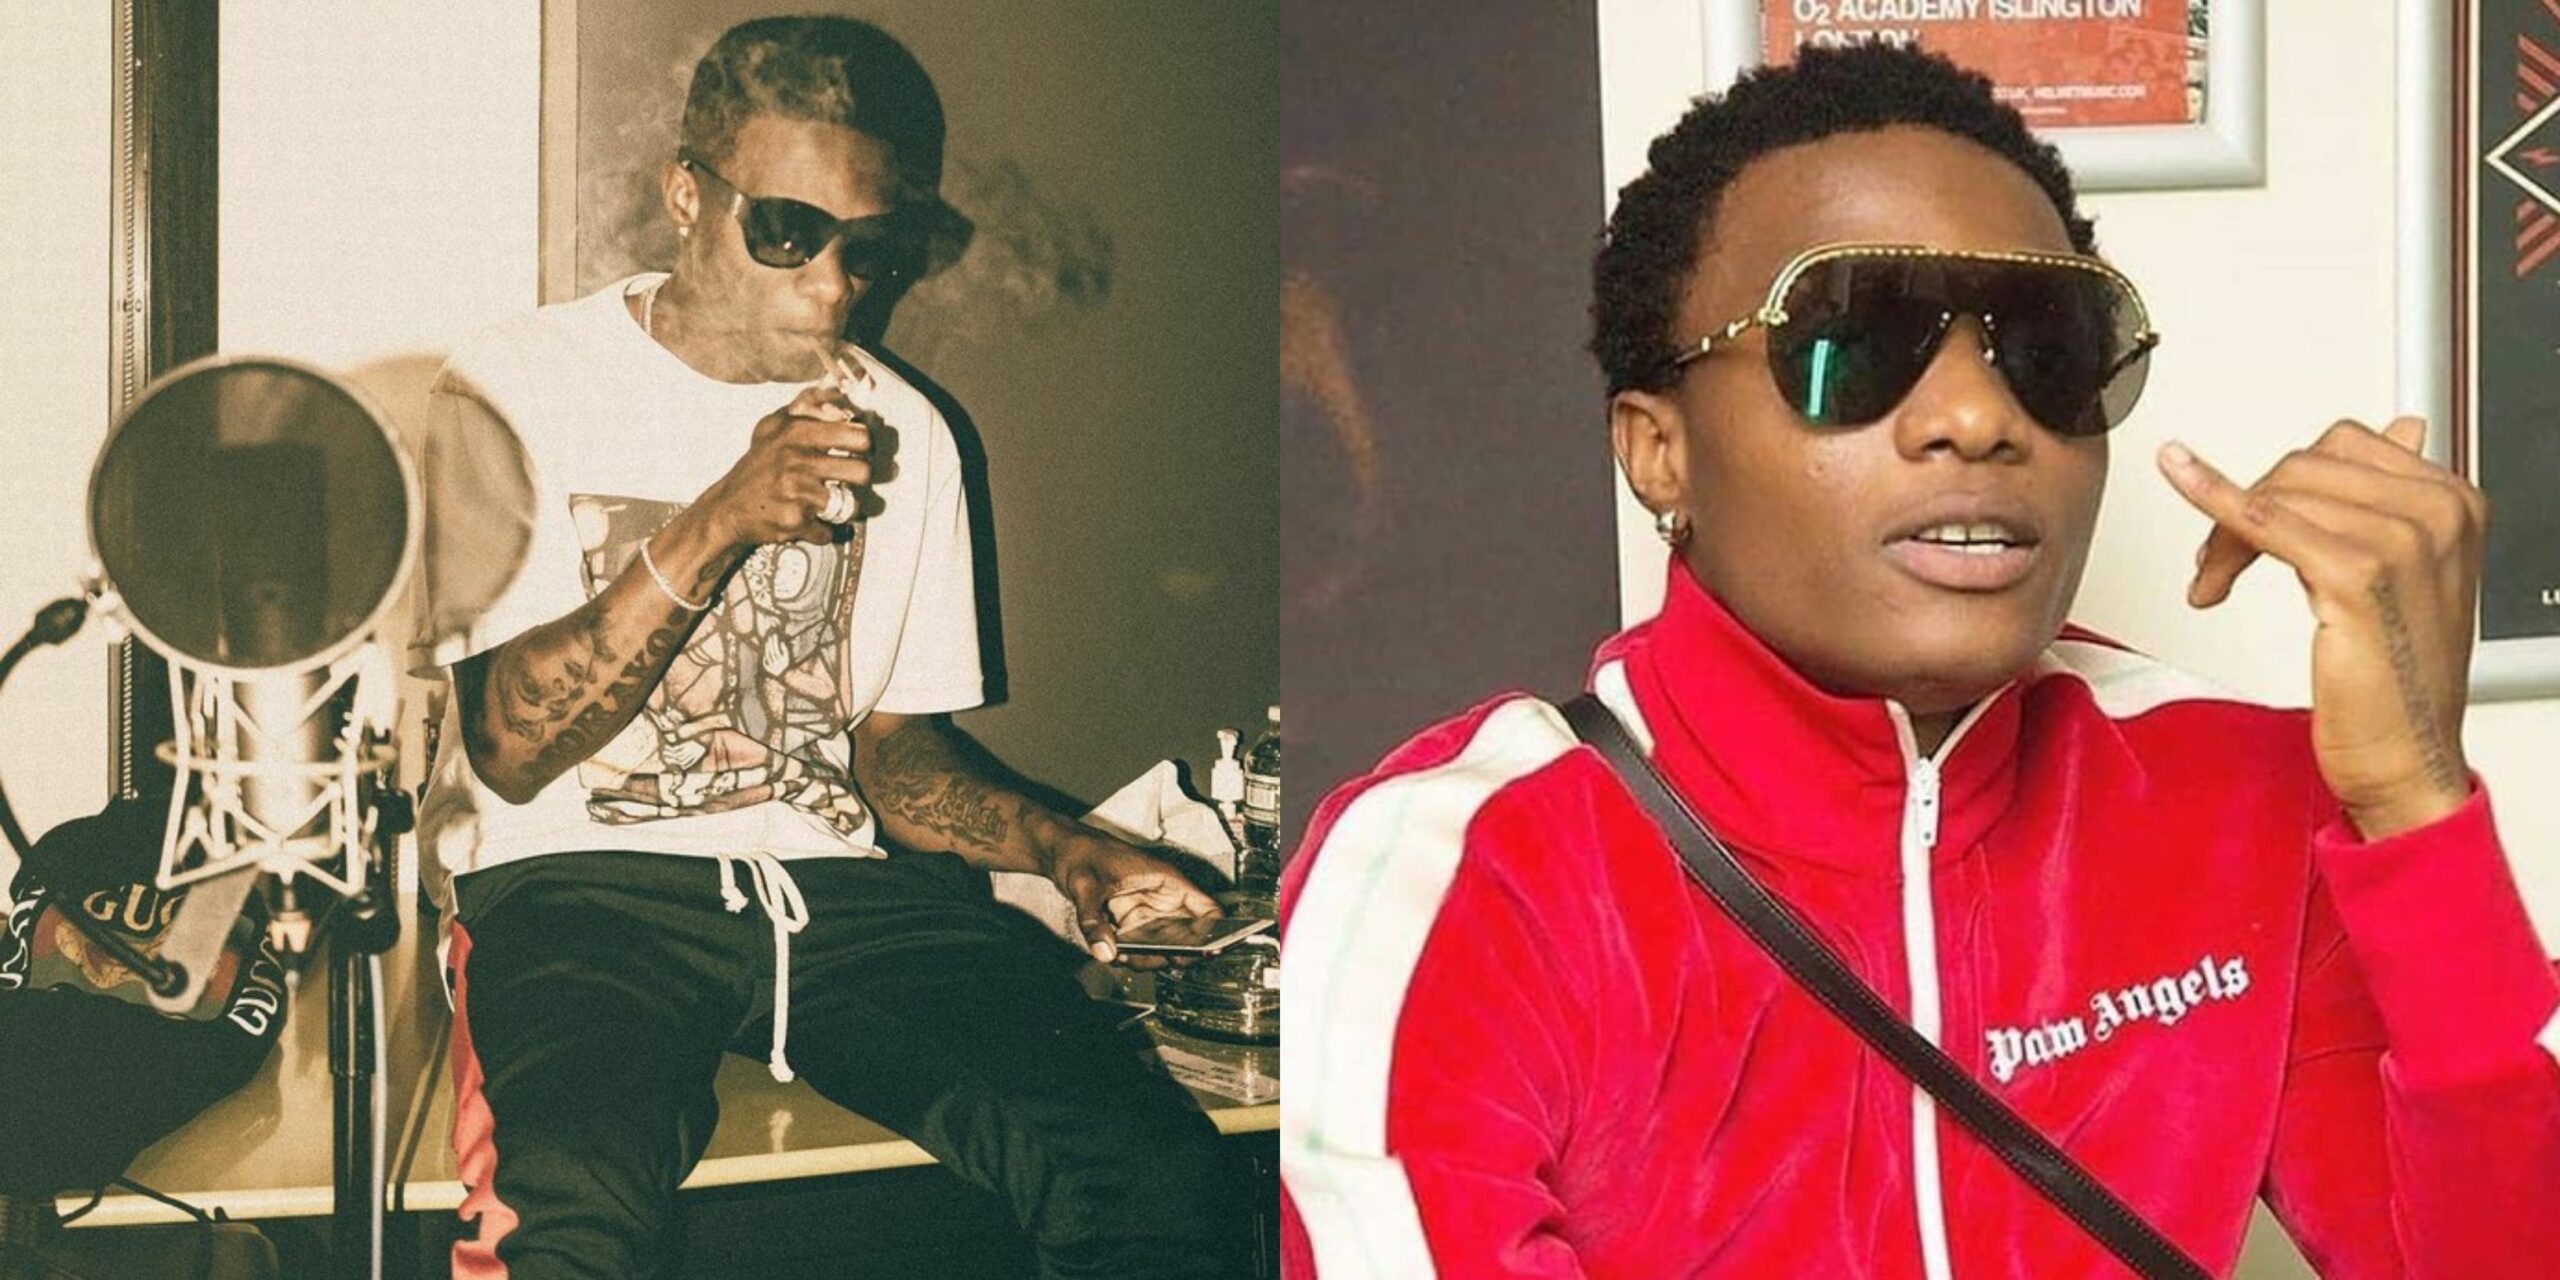 “Wizkid has lost his beauty to too much weed” -Twitter user